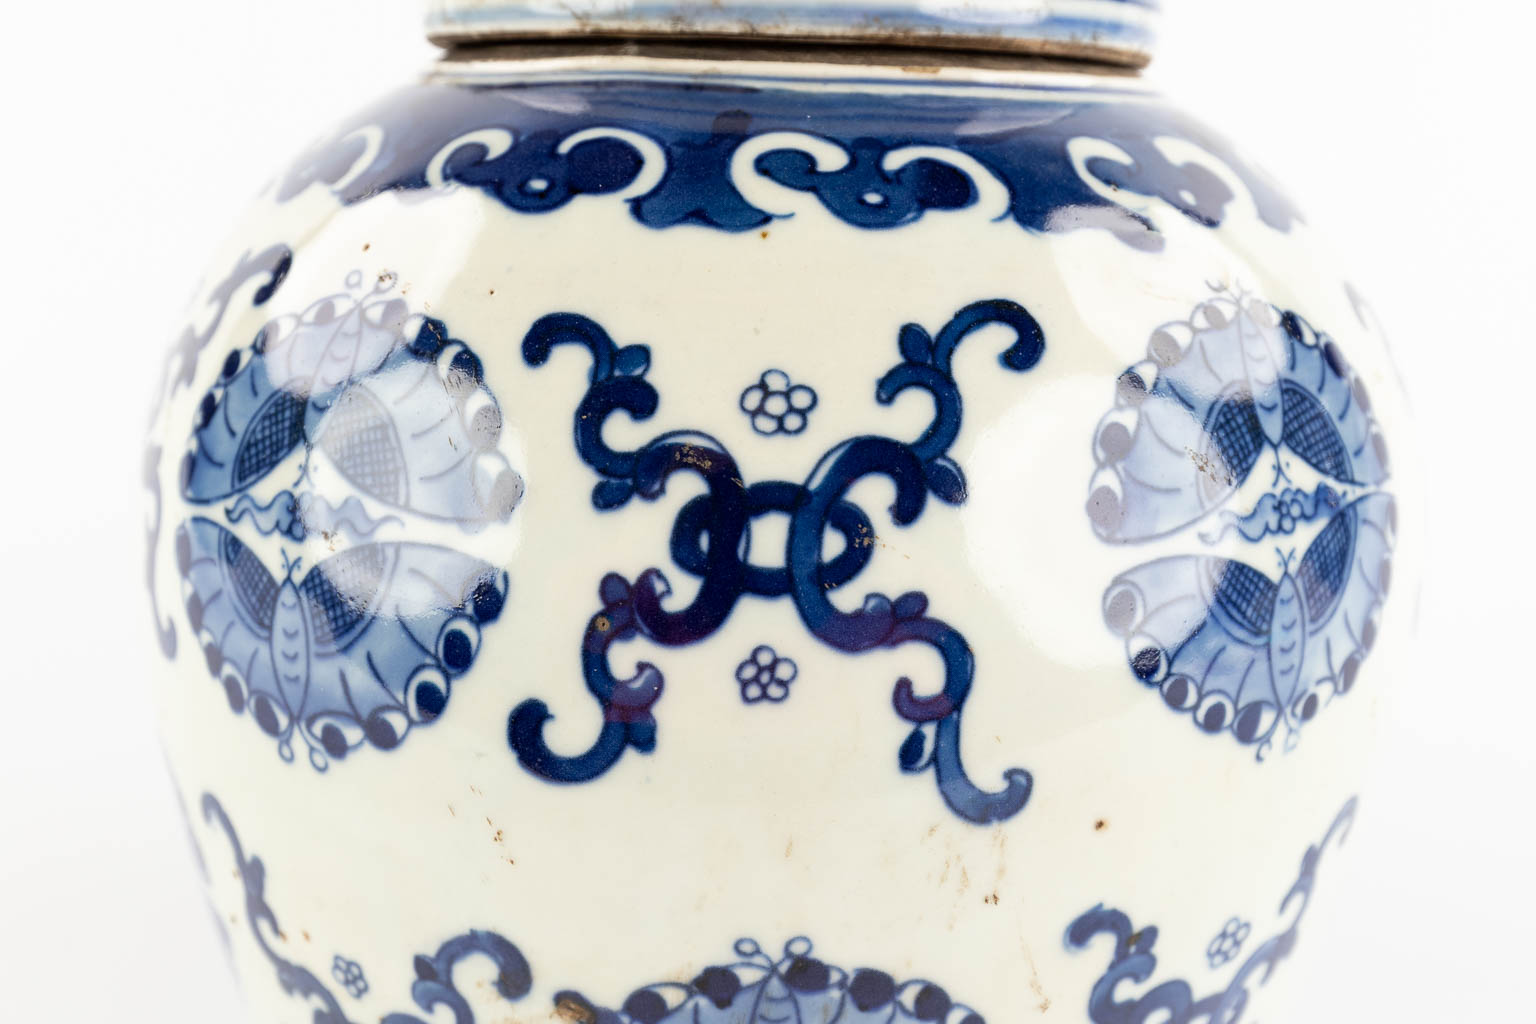 A Chinese ginger jar, decorated with butterflies, export porcelain for the Middle Eastern market. 19th C. (H:26 x D:23 cm)